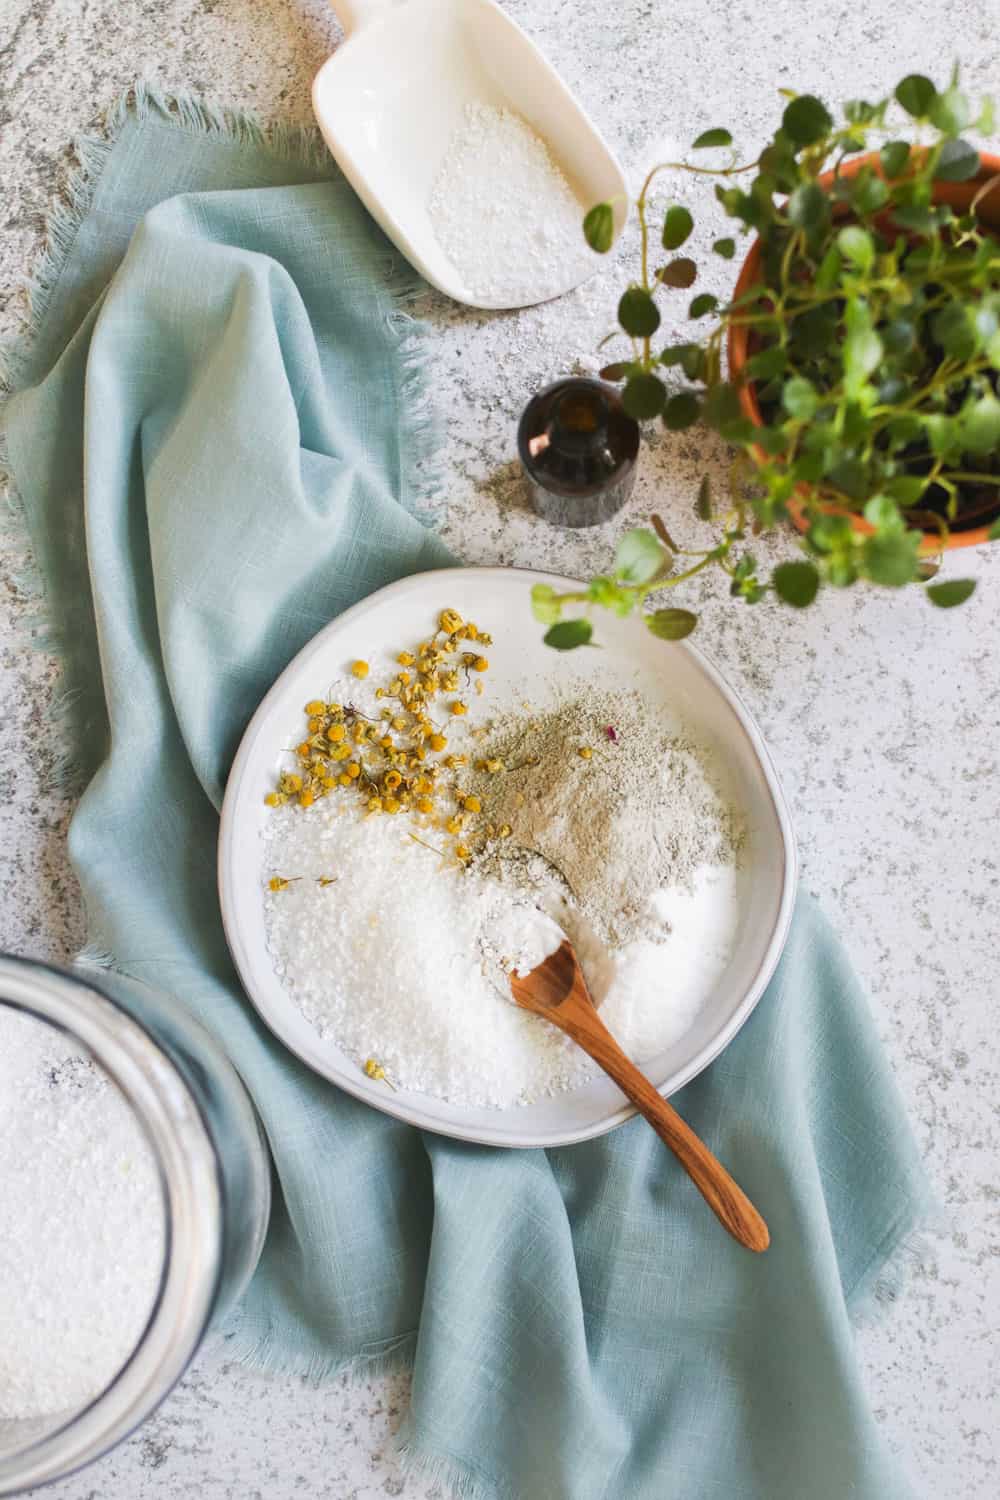 7 Best Bath Remedies For Everyday Ailments: Epsom Salt + Hot Water 